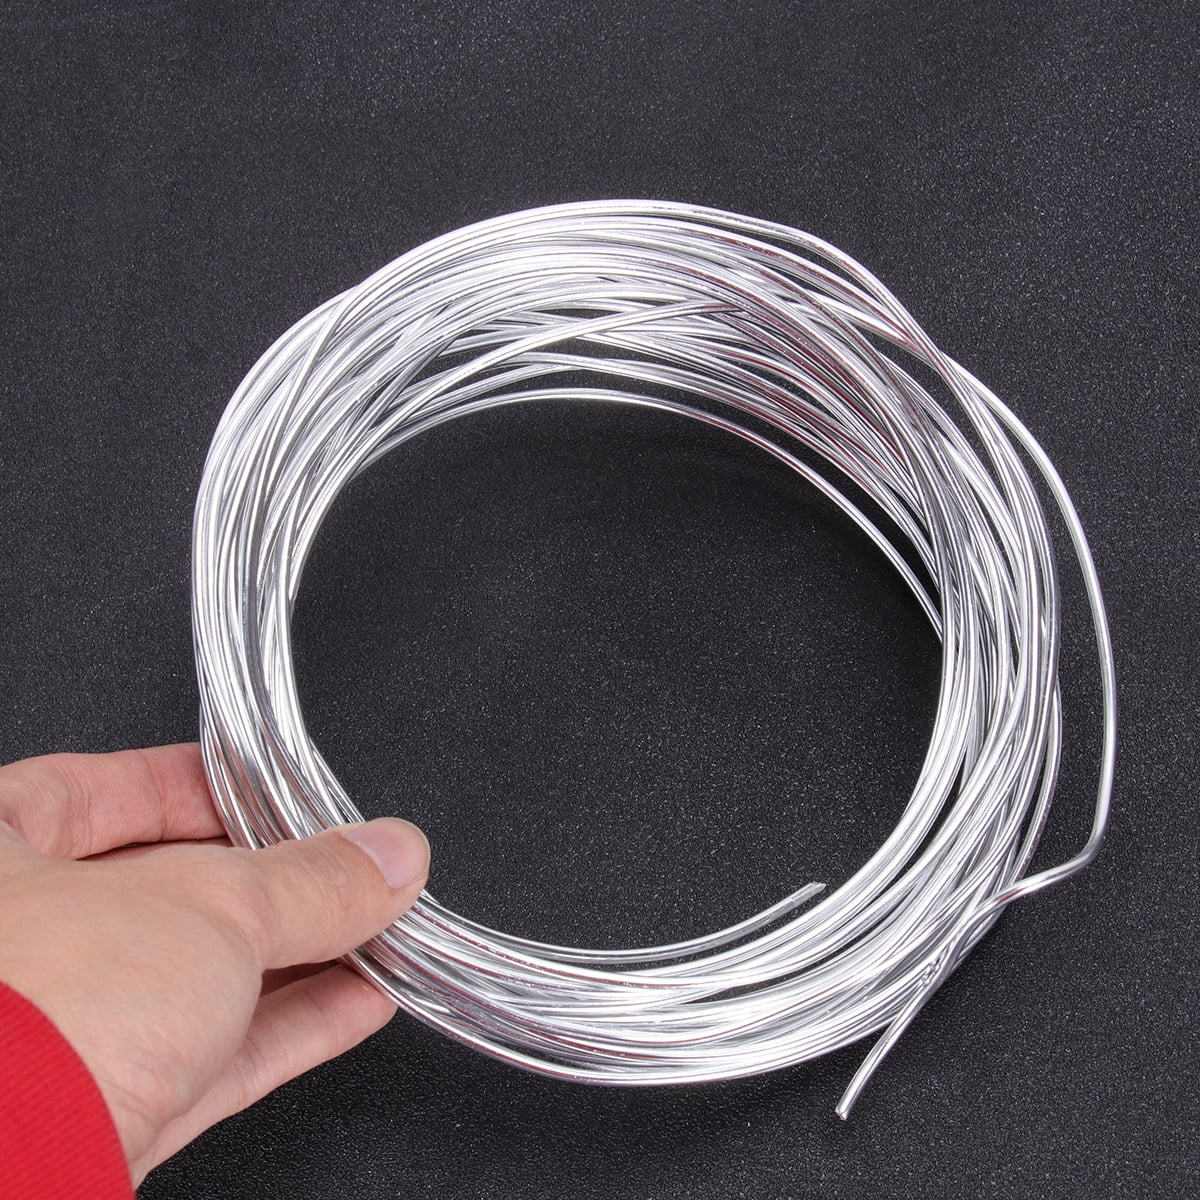 2pcs Soft Iron Wire Skeleton Wire Sculpting Wire for Clay Sculpture Tools  Dead Copper Wire DIY Manual Wire Skeleton Making Wire Metal Wire Bendable